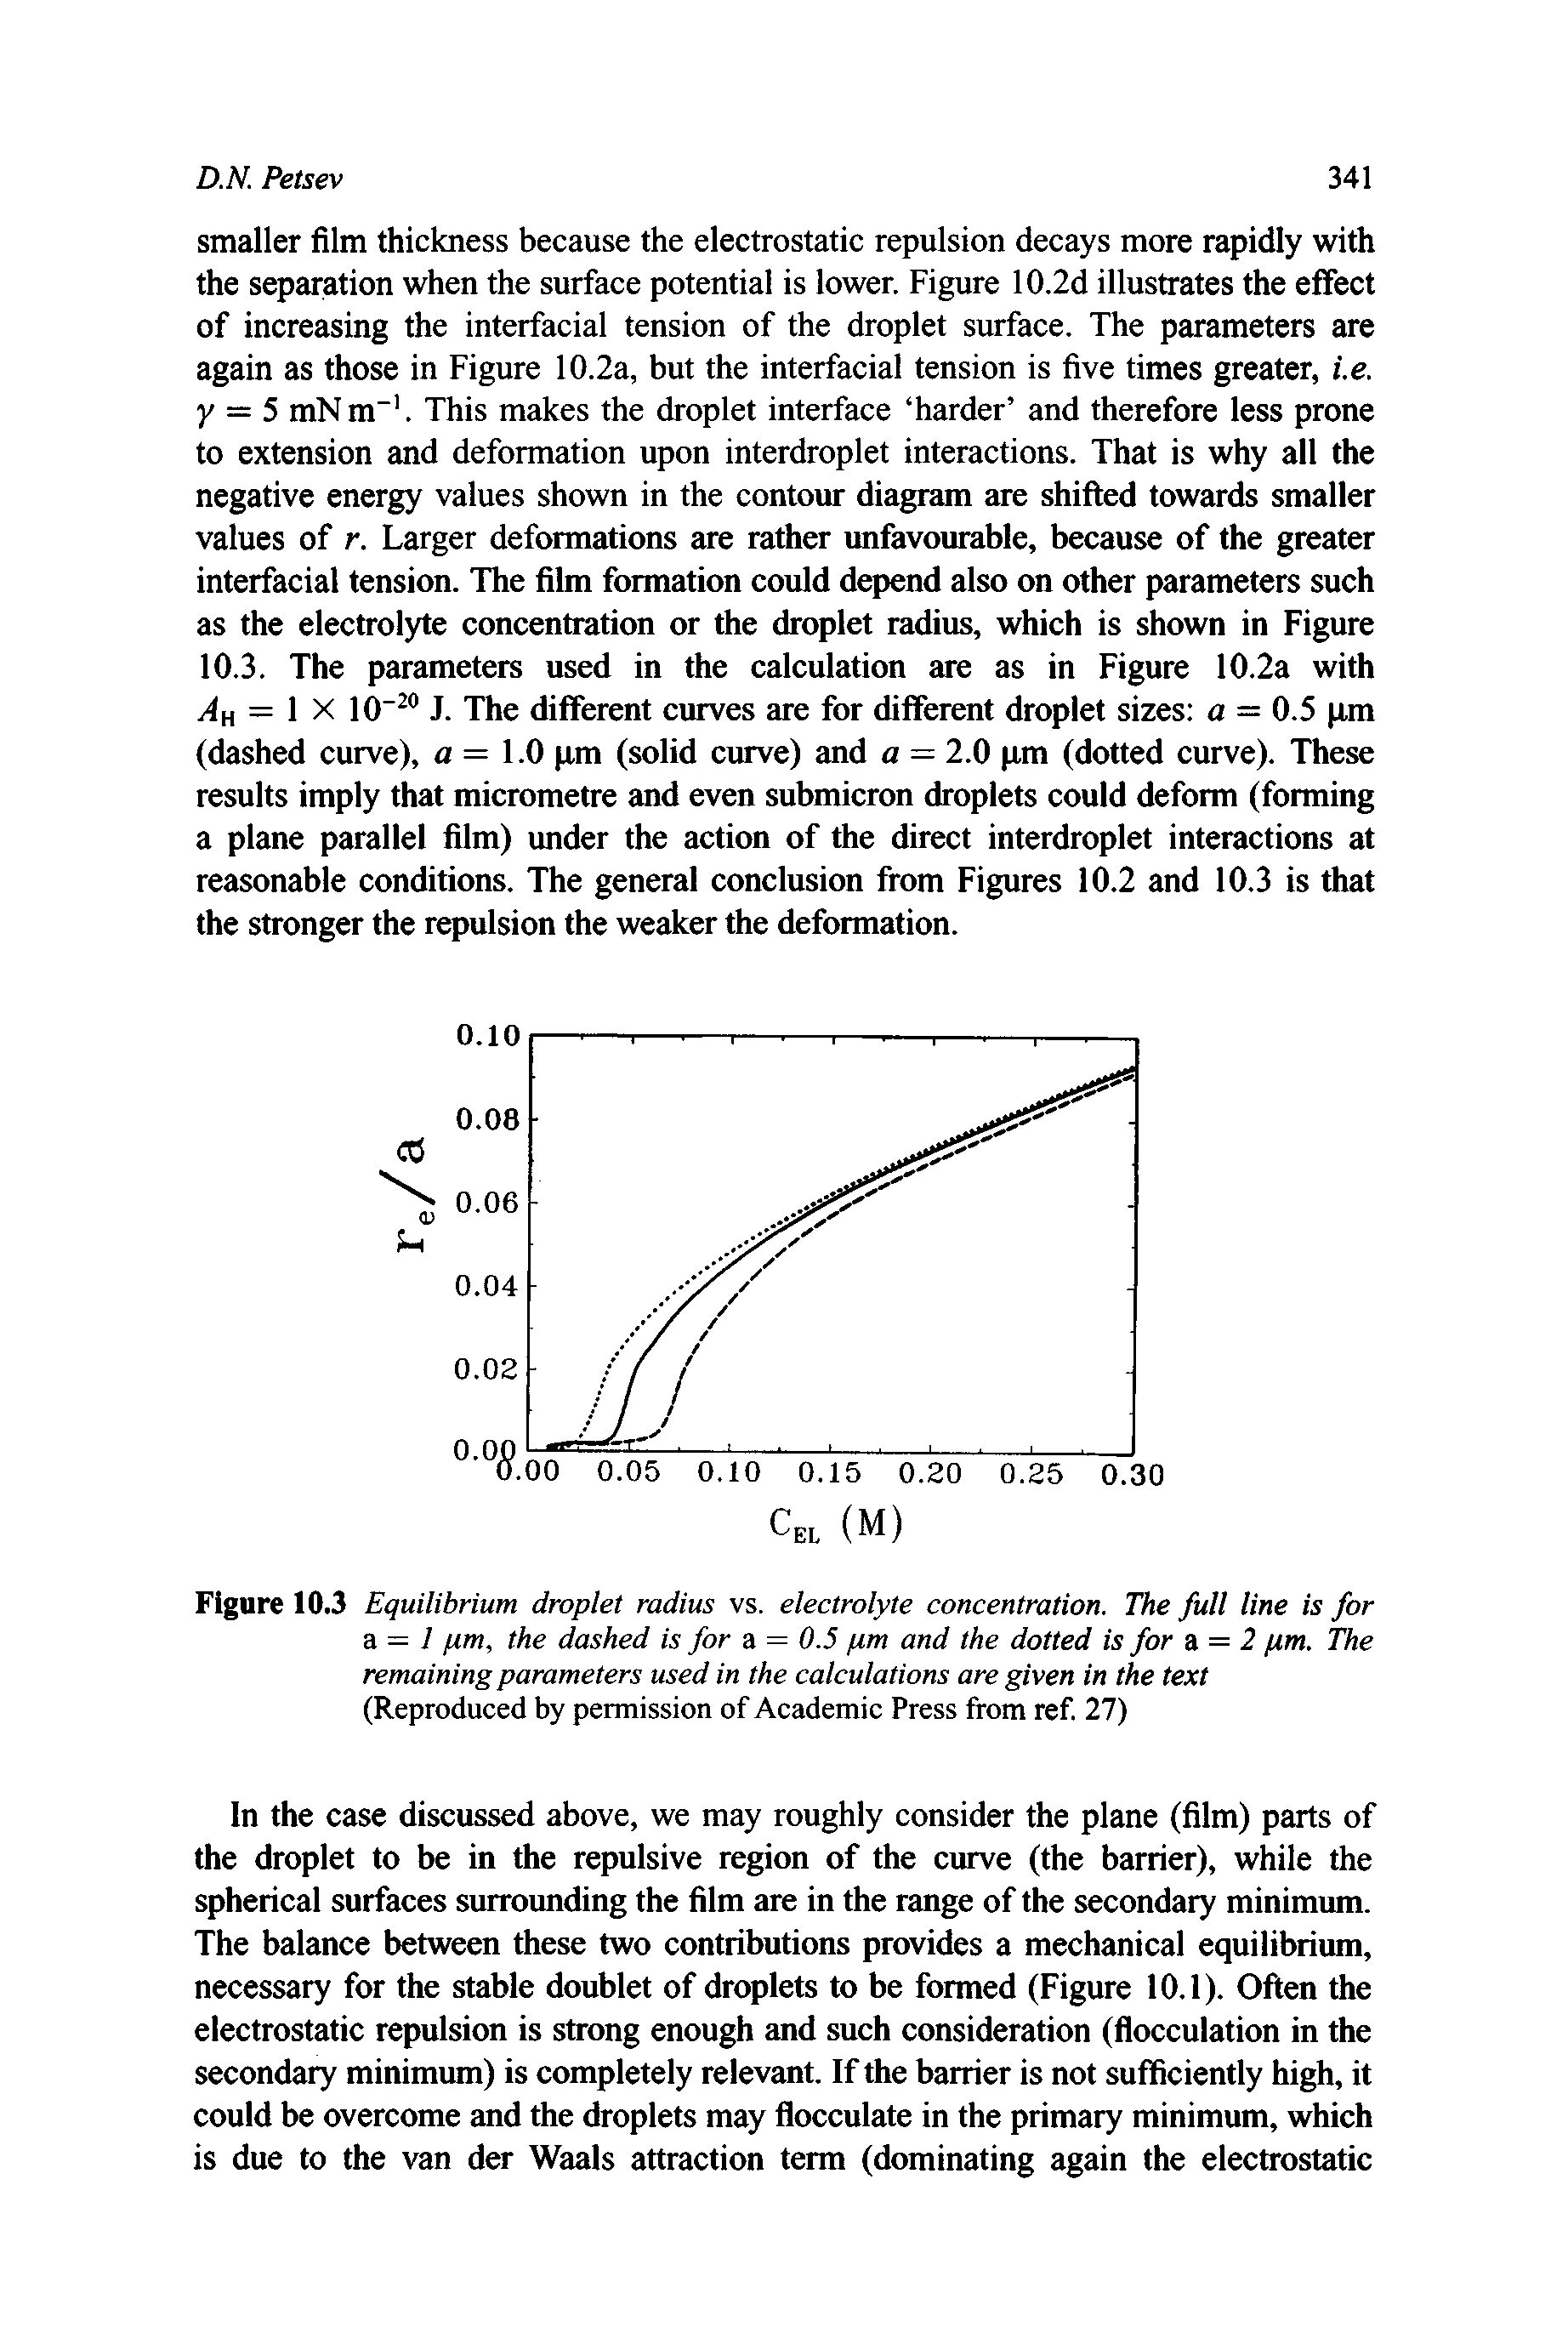 Figure 10.3 Equilibrium droplet radius vs. electrolyte concentration. The full line is for a = 1 pm, the dashed is for a = 0.5 pm and the dotted is for a = 2 pm. The remaining parameters used in the calculations are given in the text (Reproduced by permission of Academic Press from ref. 27)...